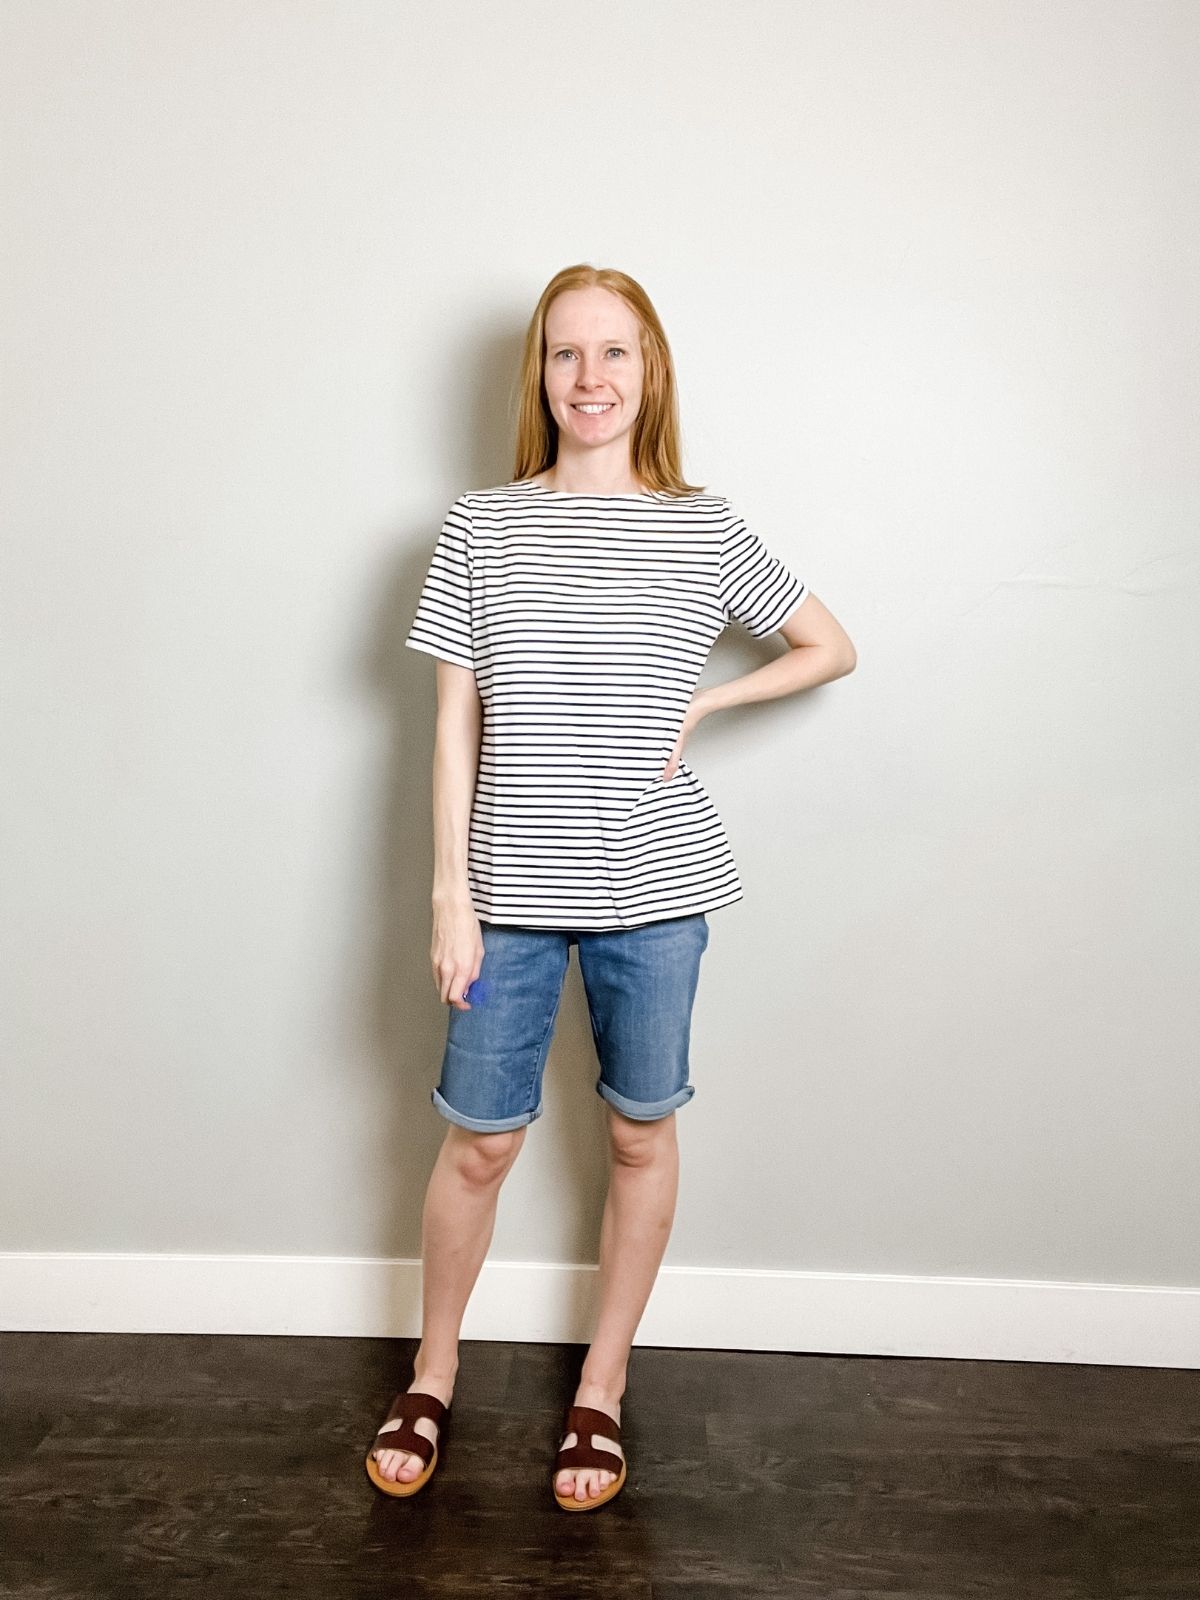 denim bermuda shorts styled with striped top